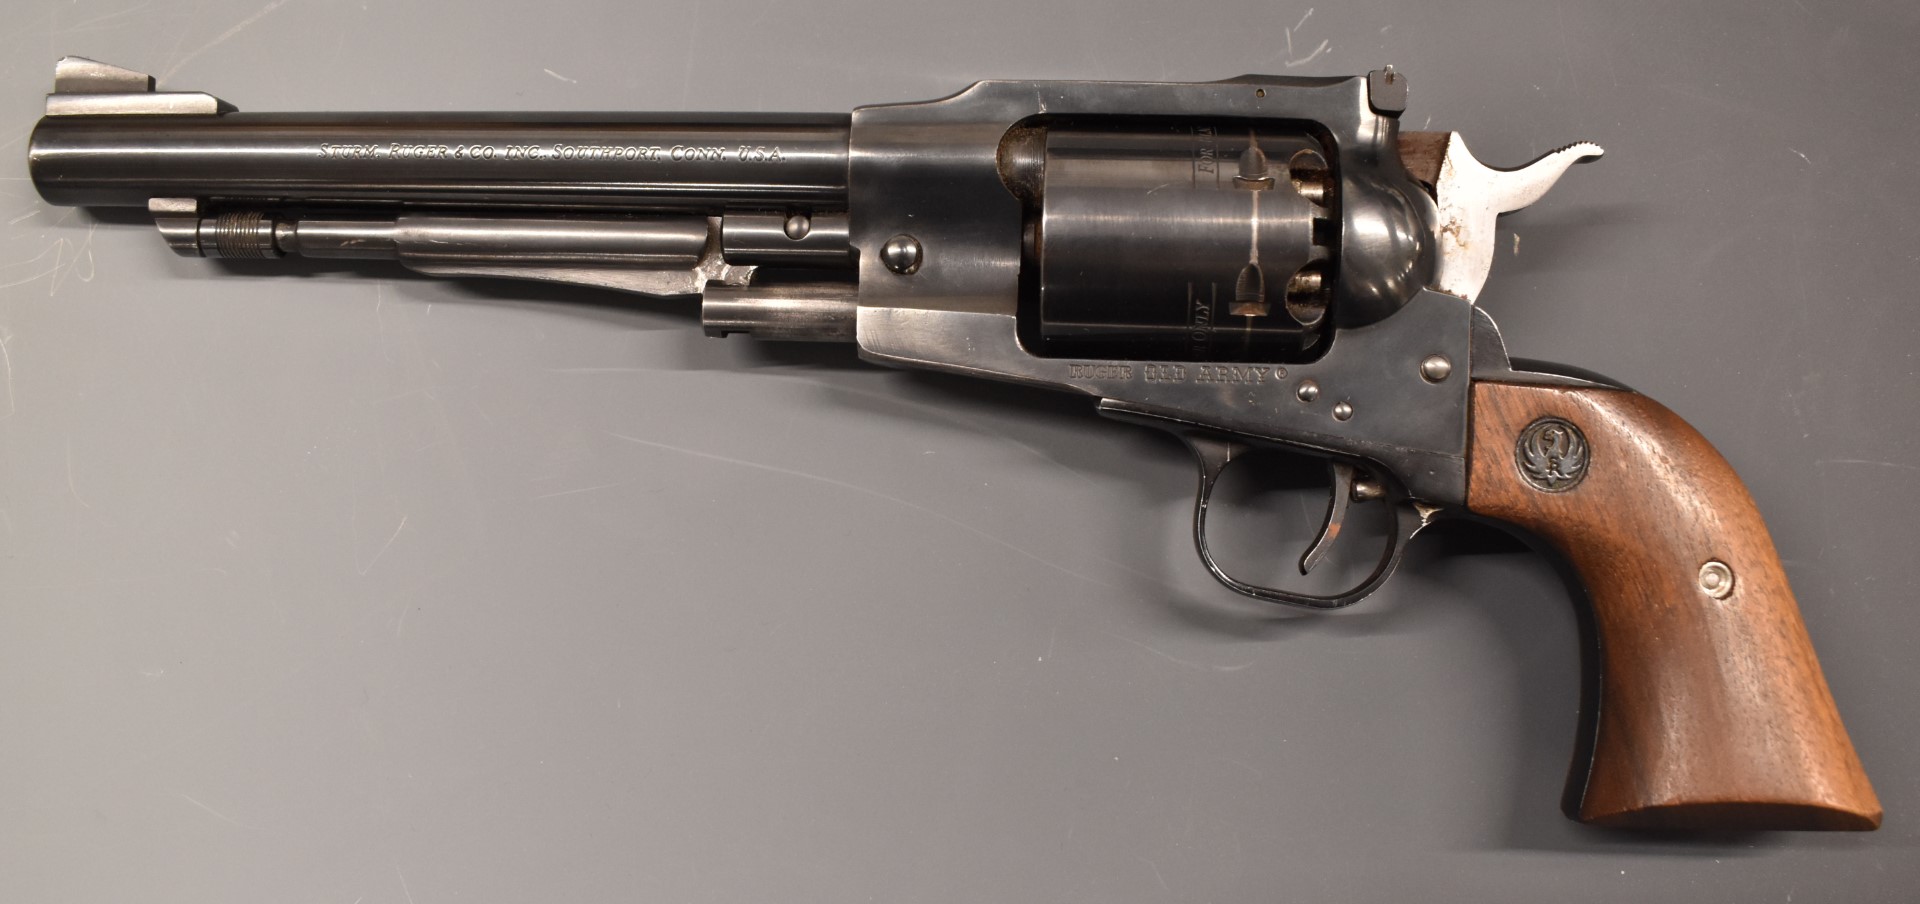 Ruger Old Army .44 six-shot single action revolver with shaped wooden grips, adjustable sights - Image 2 of 2